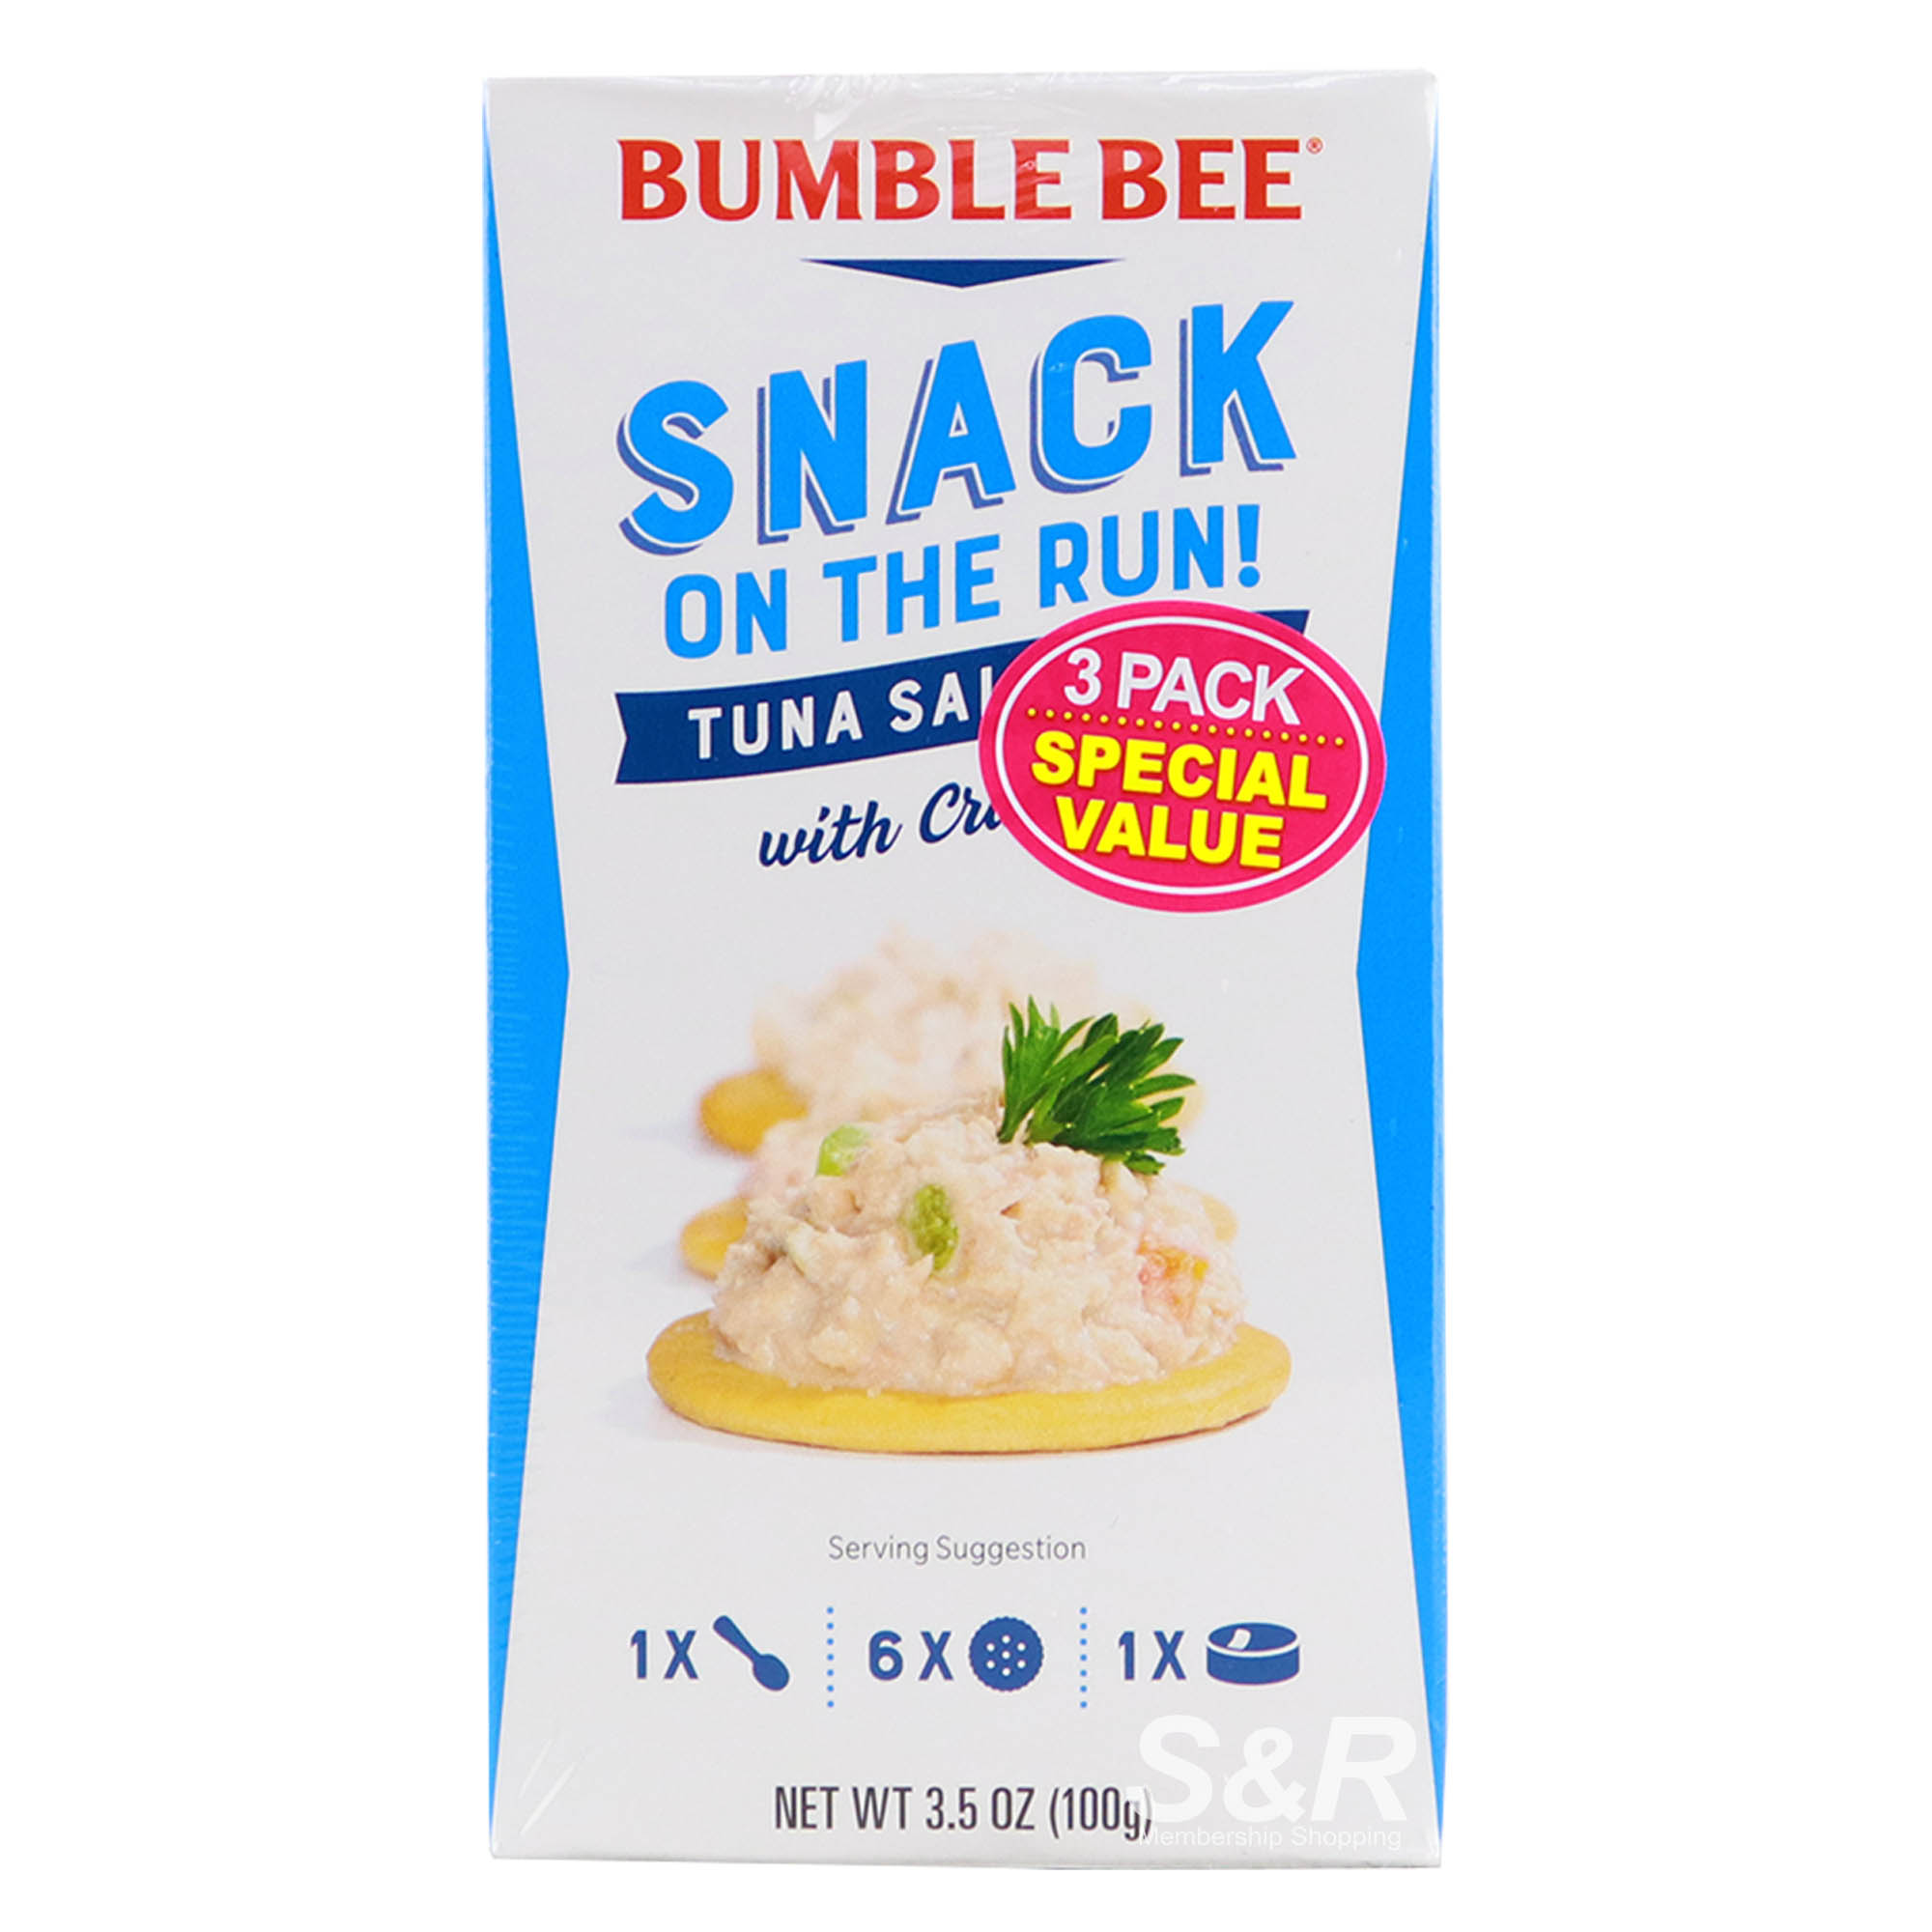 Bumble Bee Snack on The Run! Tuna Salad Kit with Crackers 3pcs